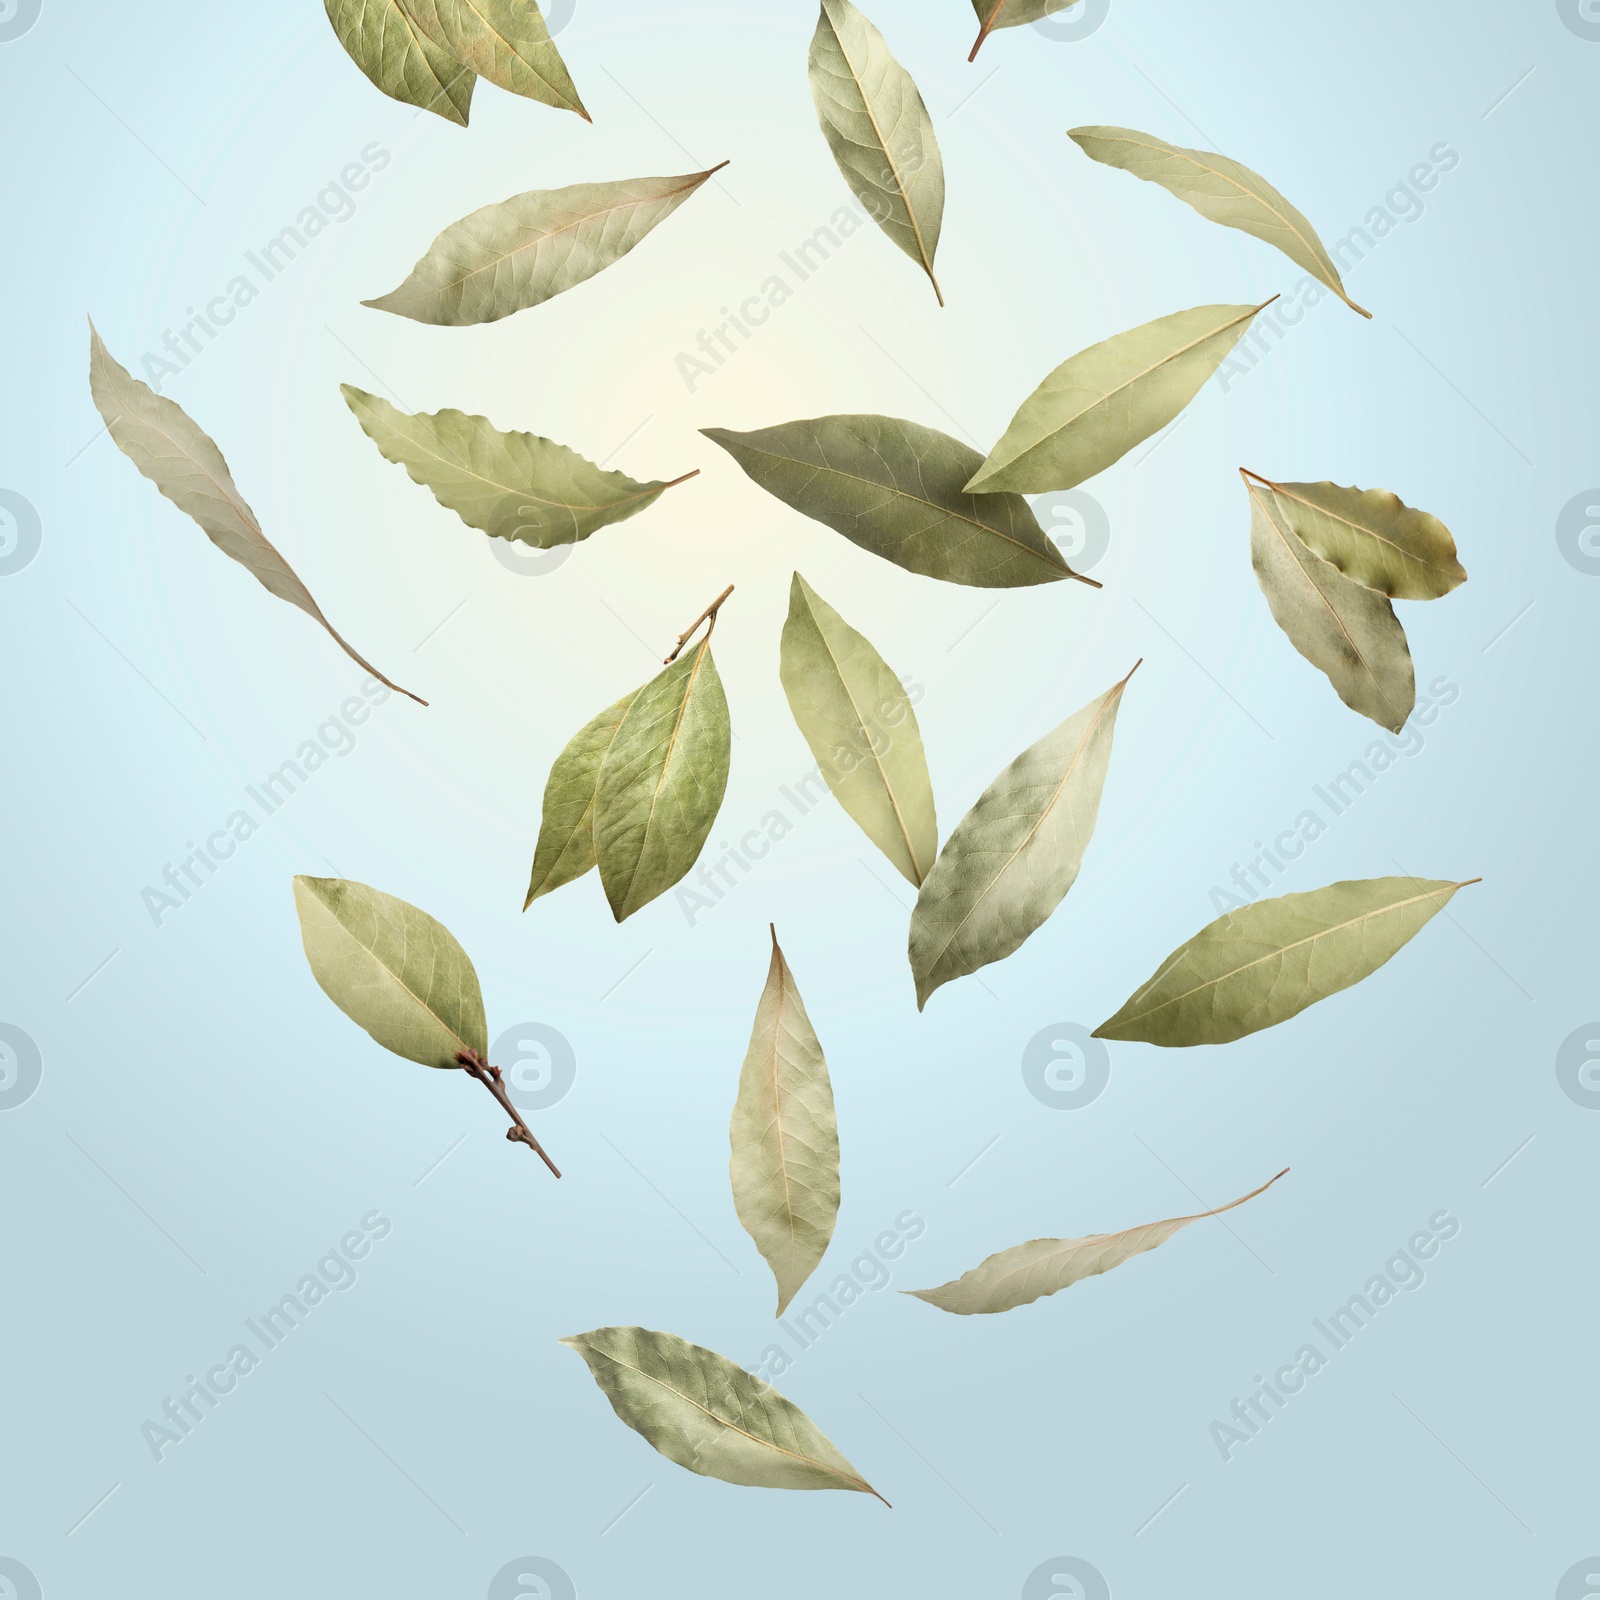 Image of Dry bay leaves falling on pale light dusty blue background